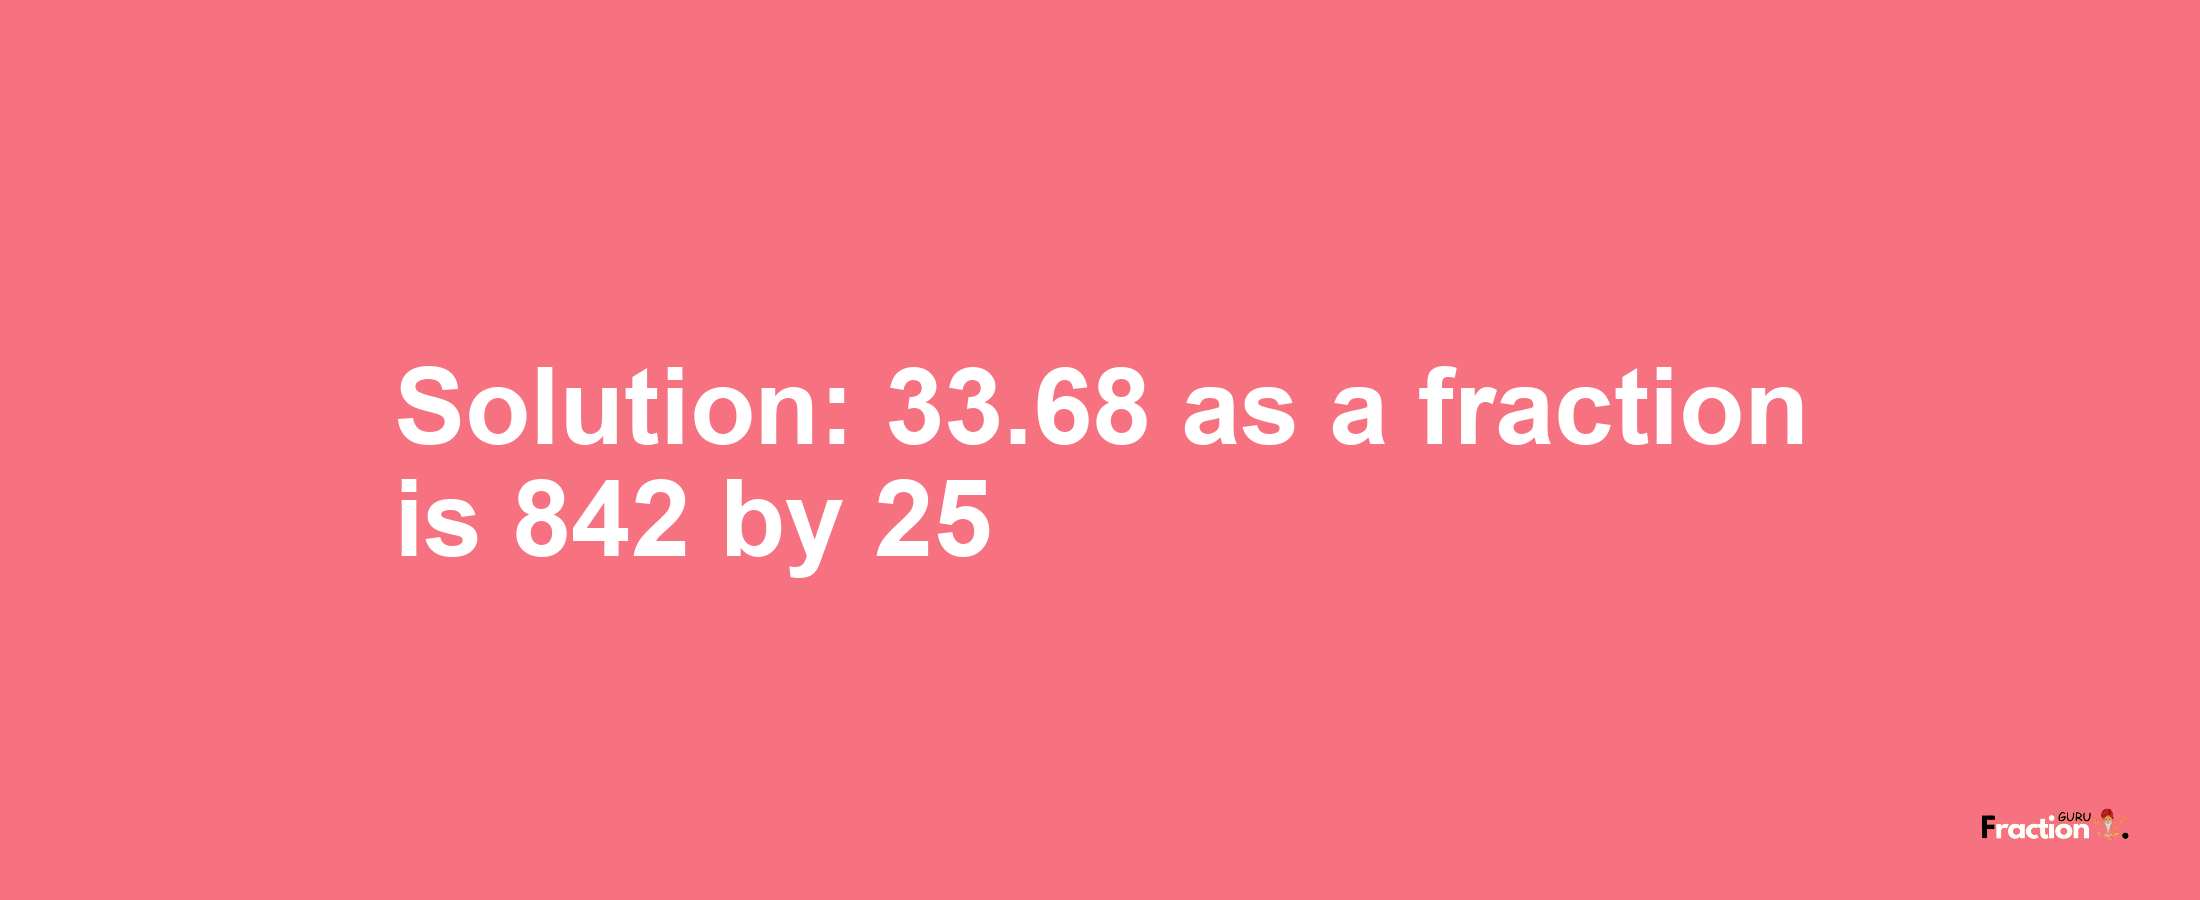 Solution:33.68 as a fraction is 842/25